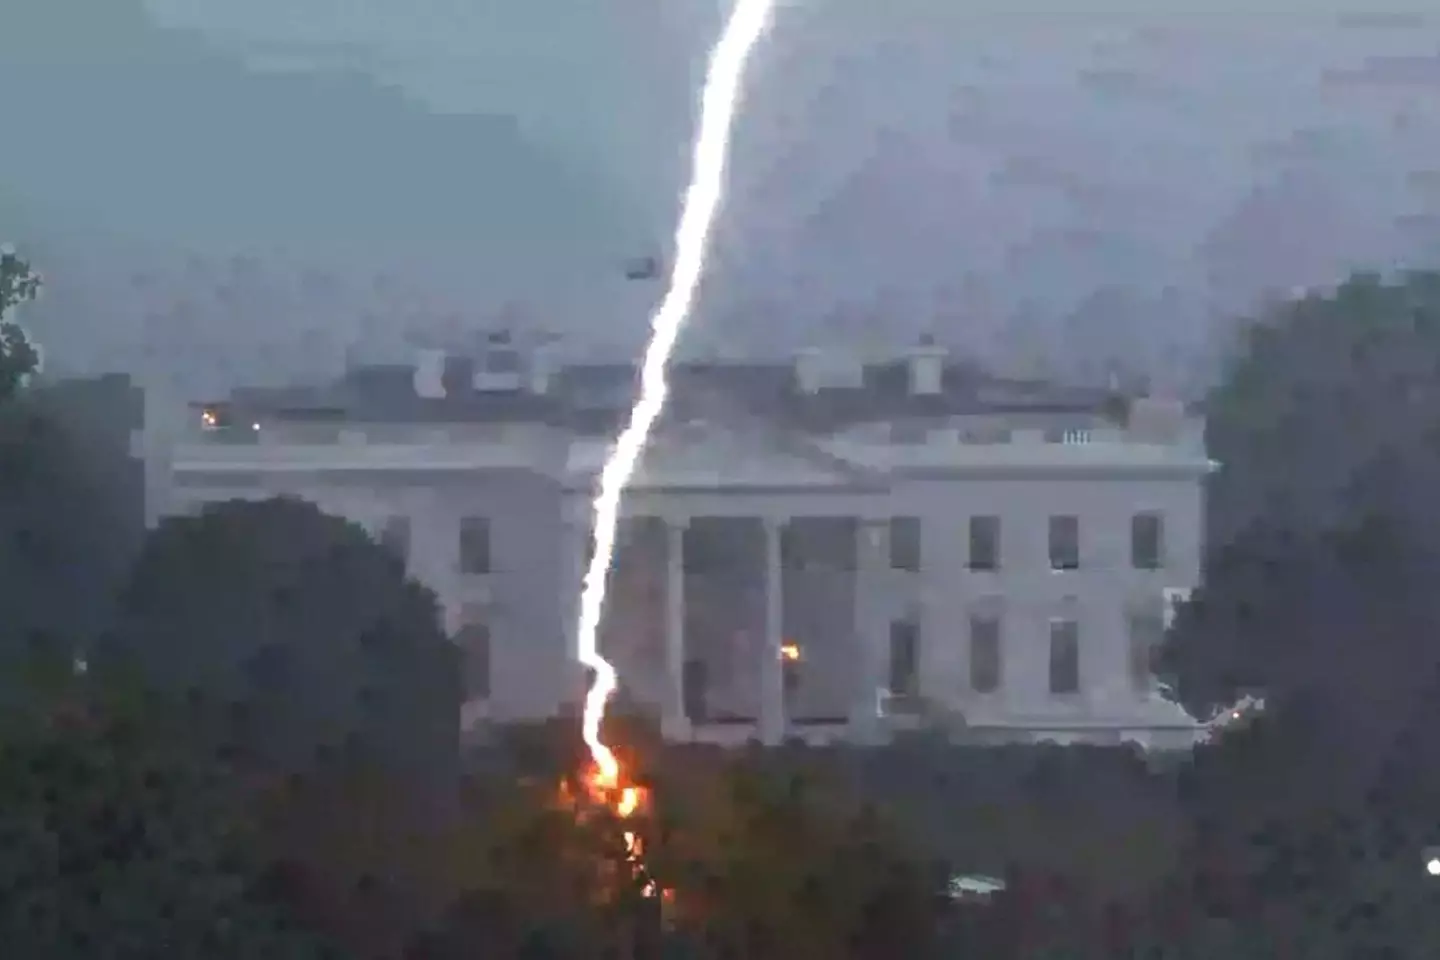 The lightning struck a tree near the White House.